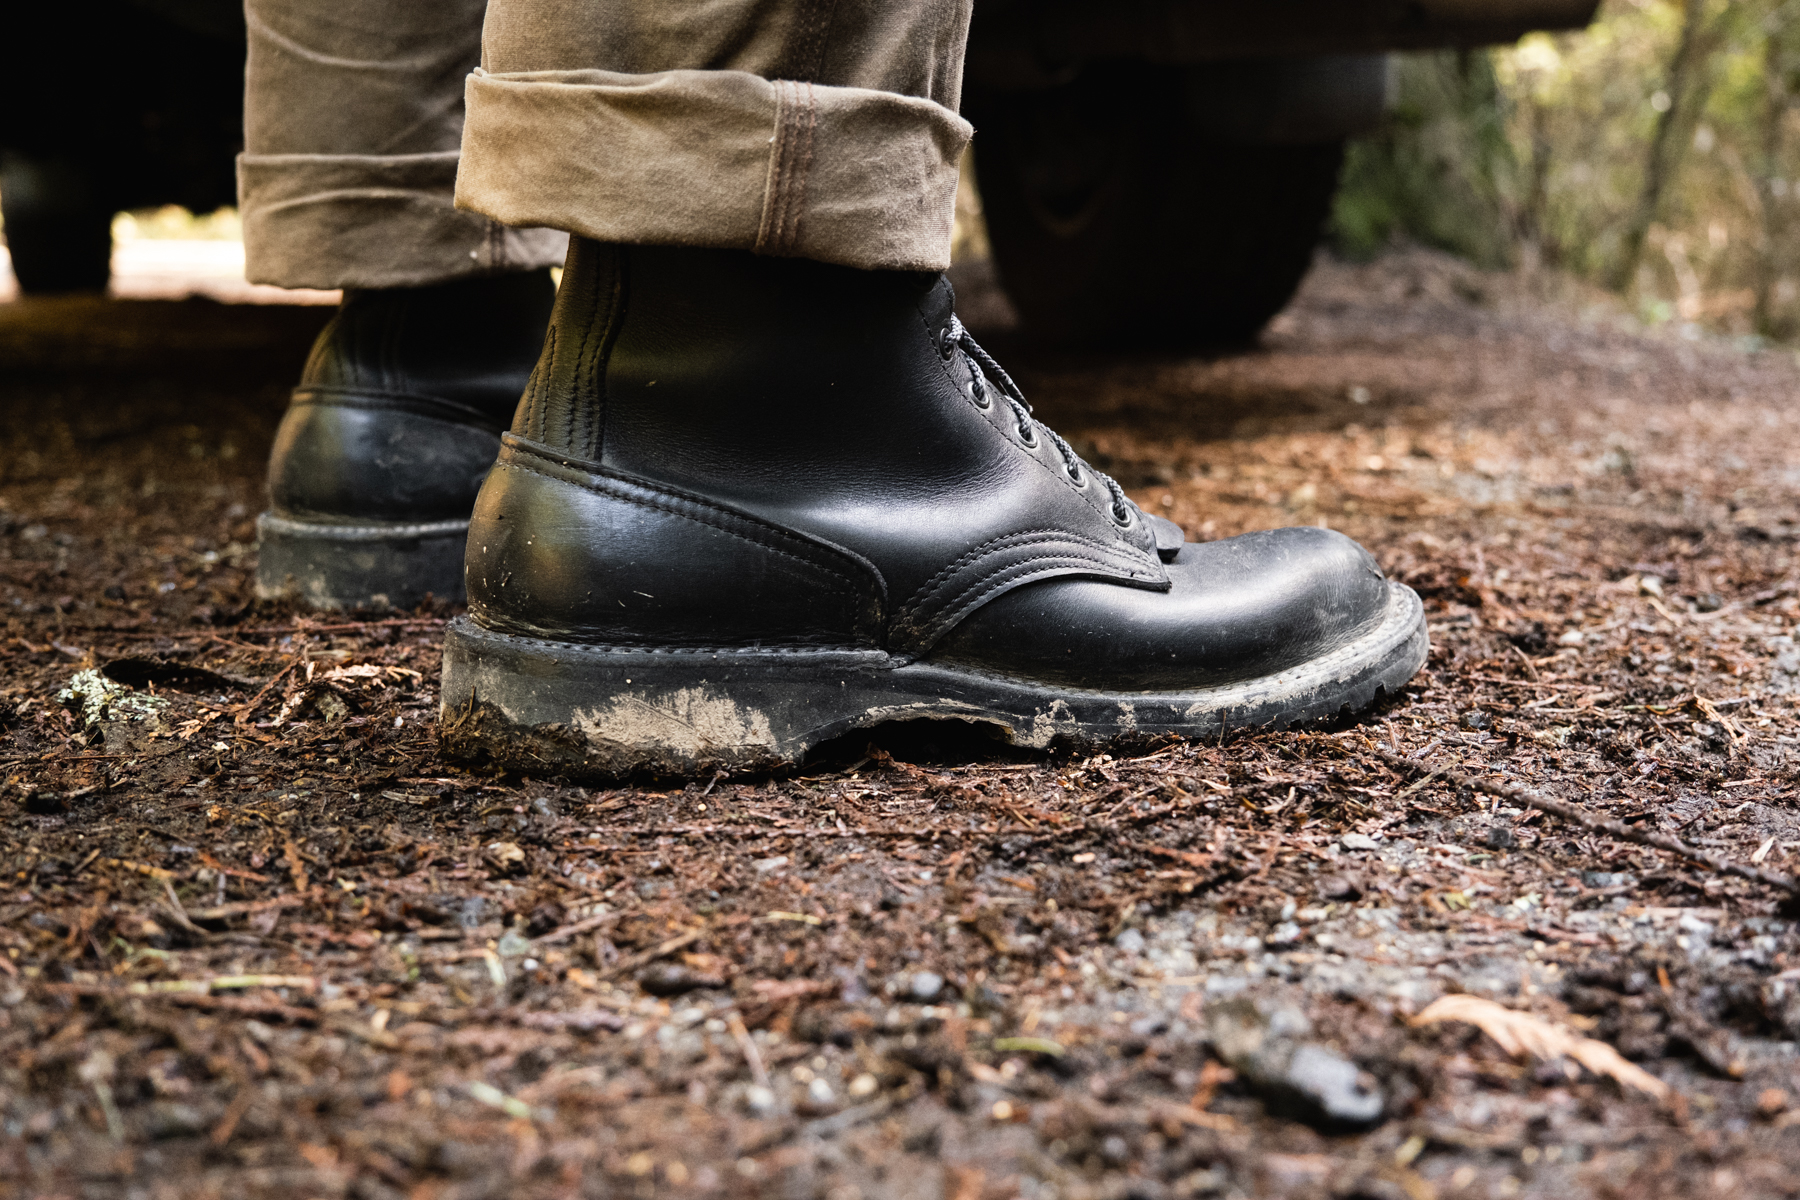 Nicks Tactical Boot in 1964 black smooth hiking in woods